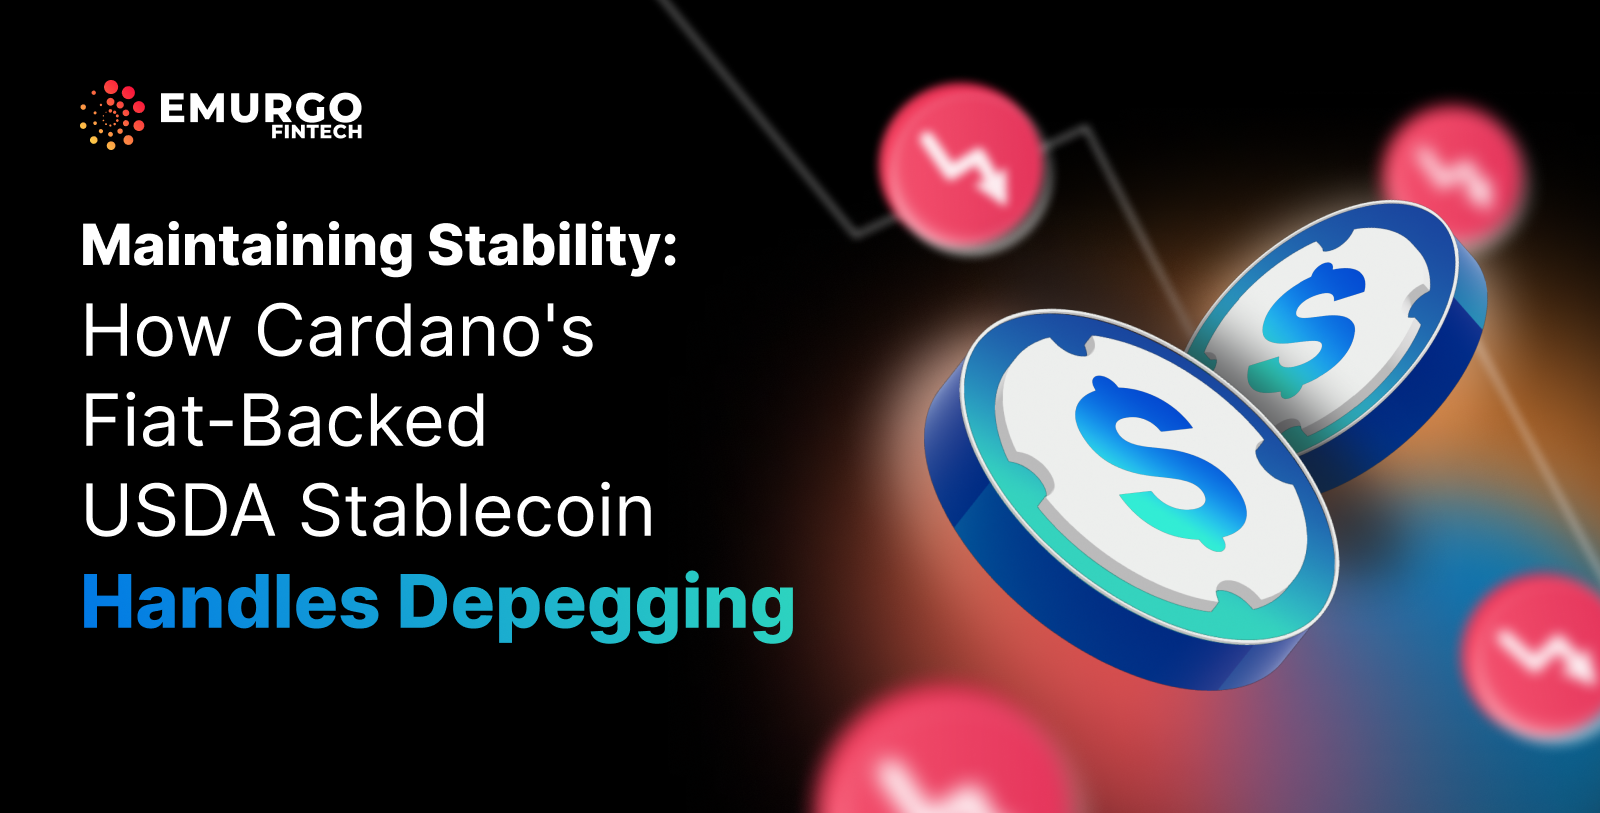 Maintaining Stability: How Cardano’s Fiat-Backed USDA Stablecoin Handles Depegging